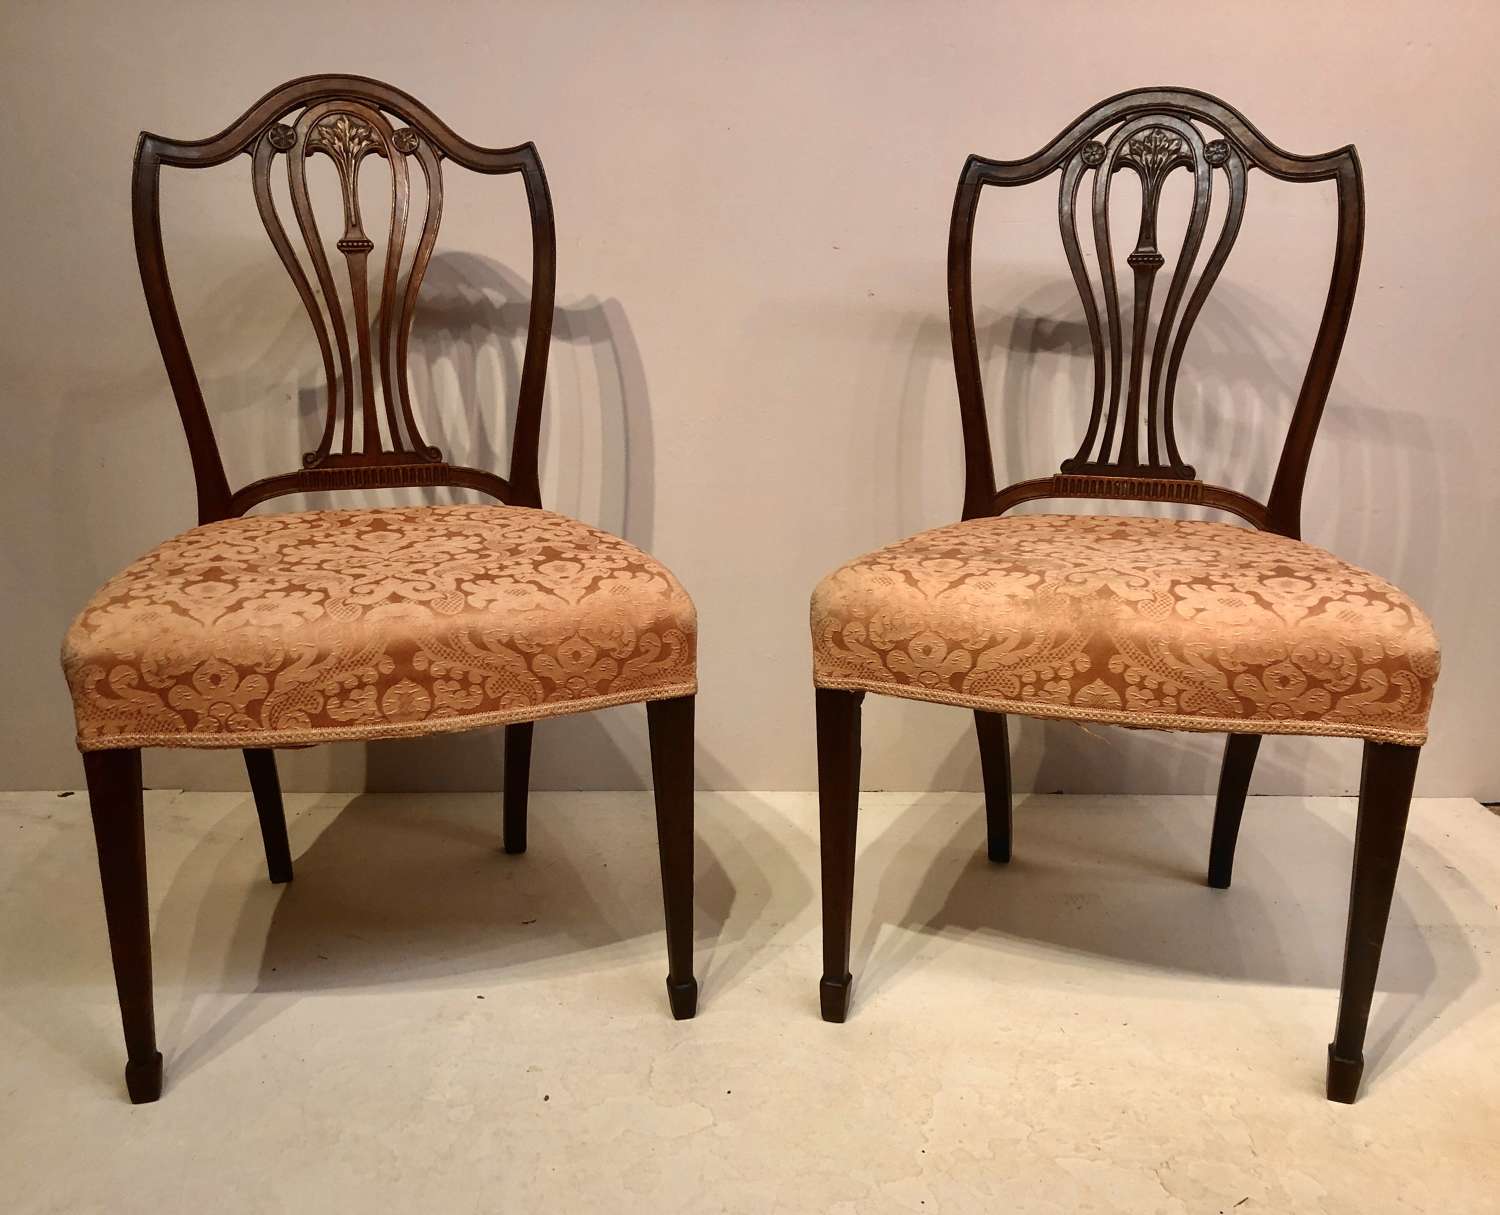 Pair of carved Hepplewhite mahogany side chairs.